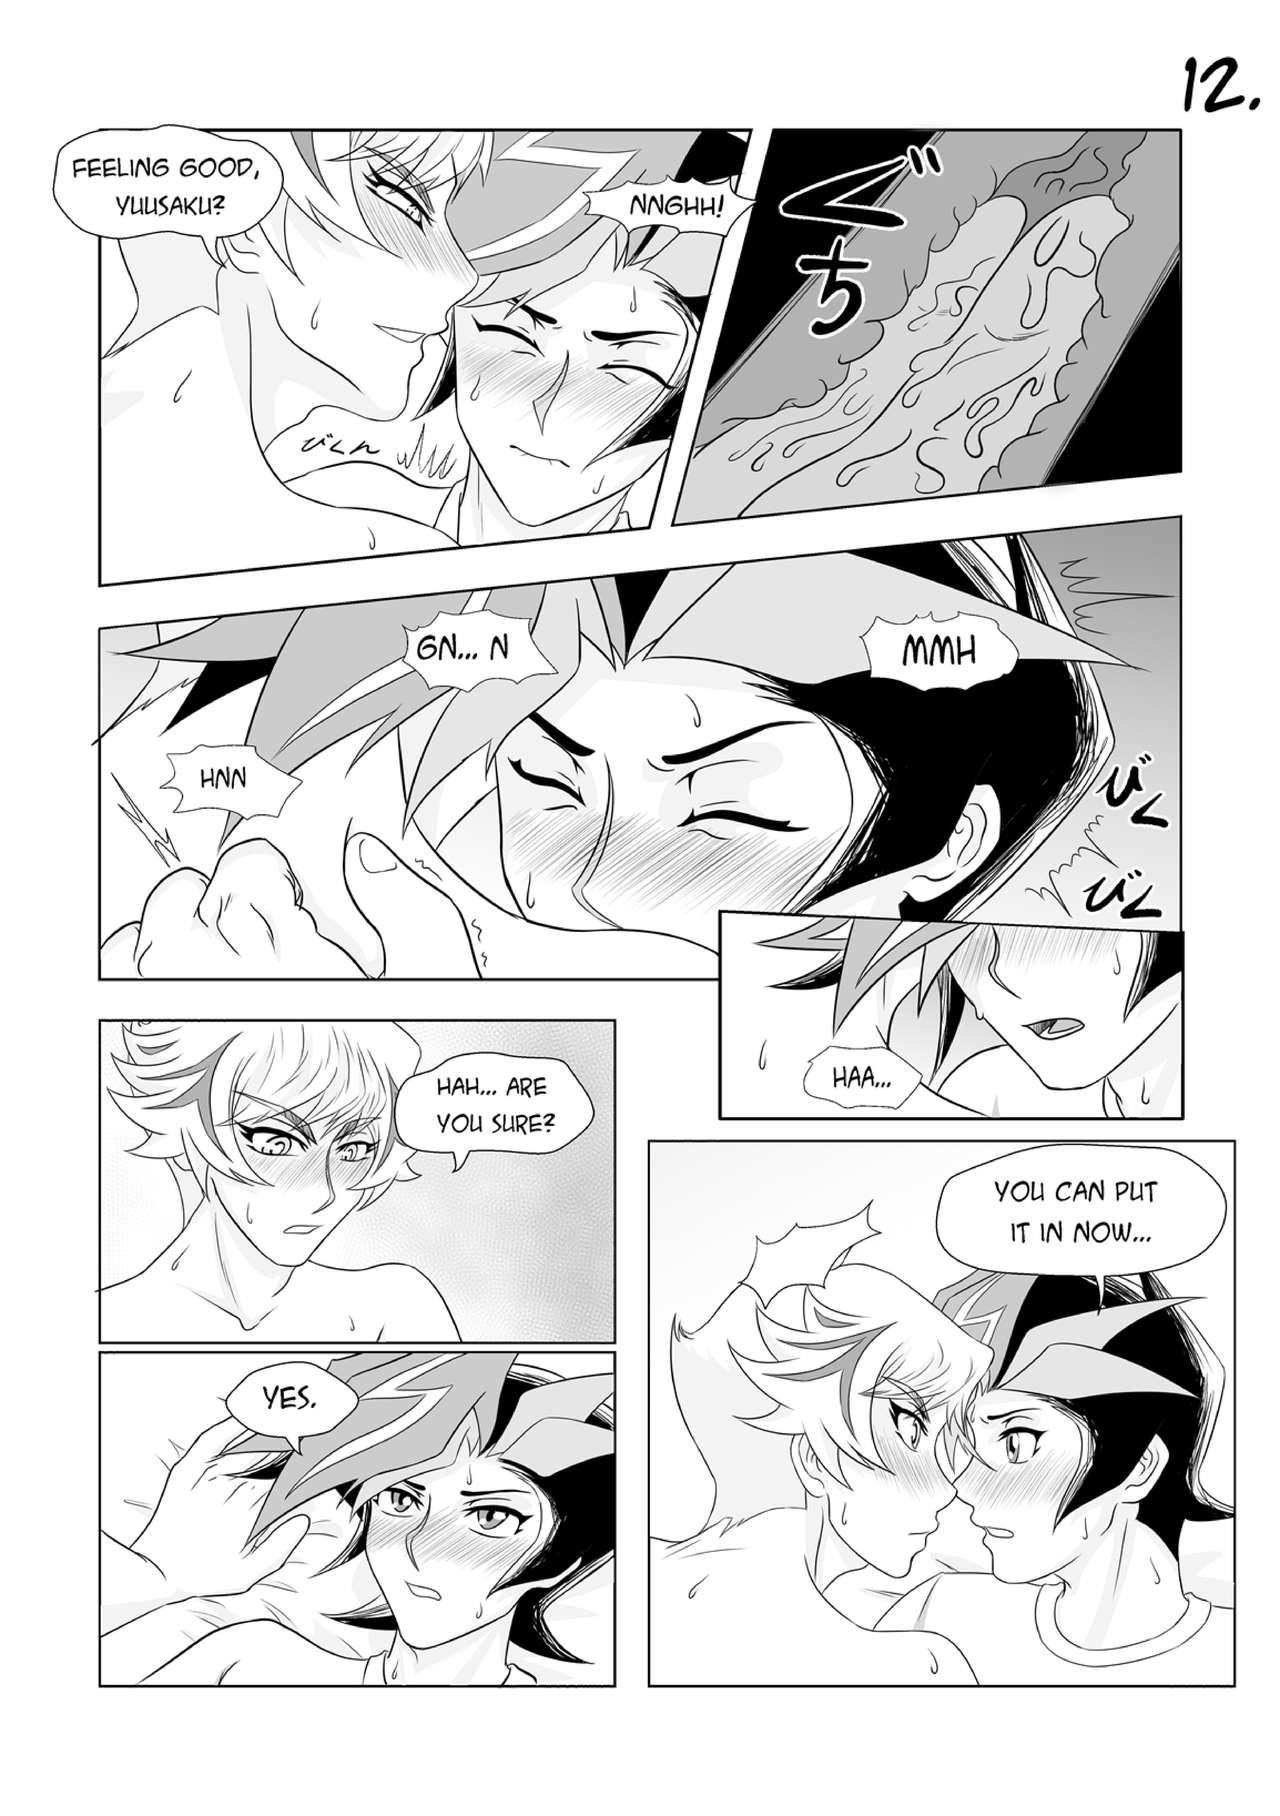 Women Sucking Welcome Home - Yu-gi-oh vrains Gaydudes - Page 13